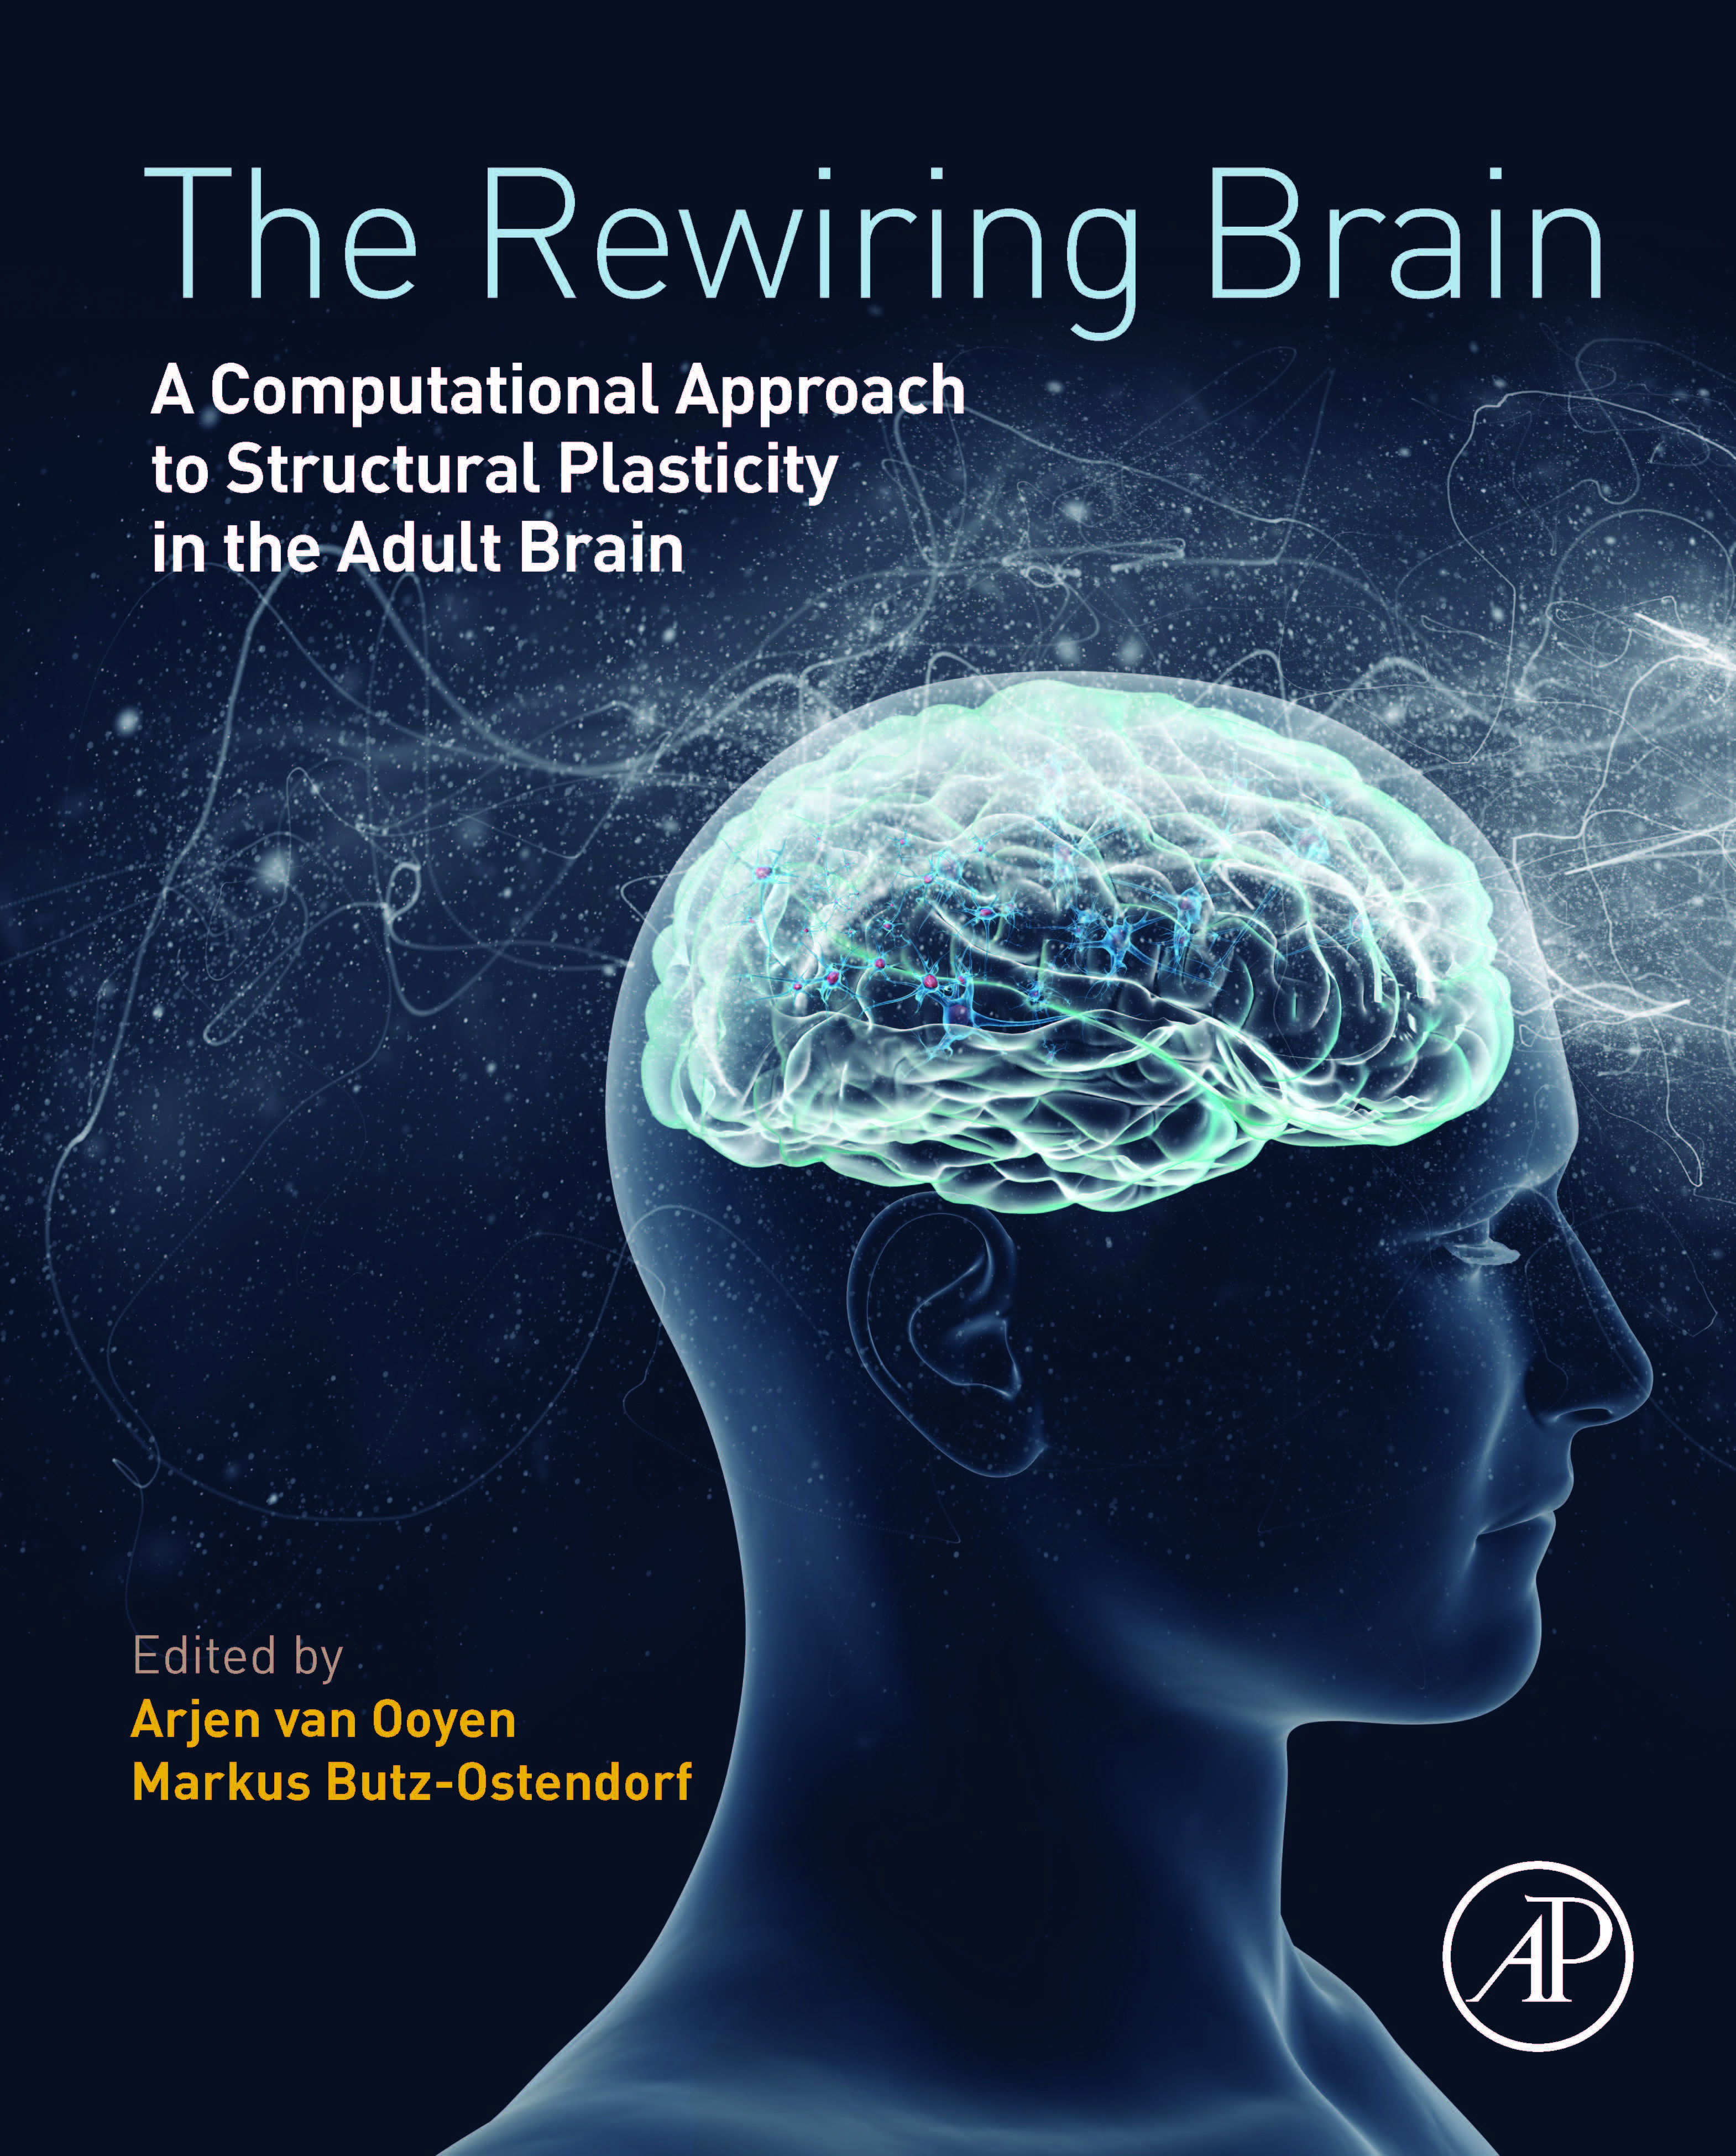 Cover of Anatomy and Plasticity in Large-Scale Brain Models